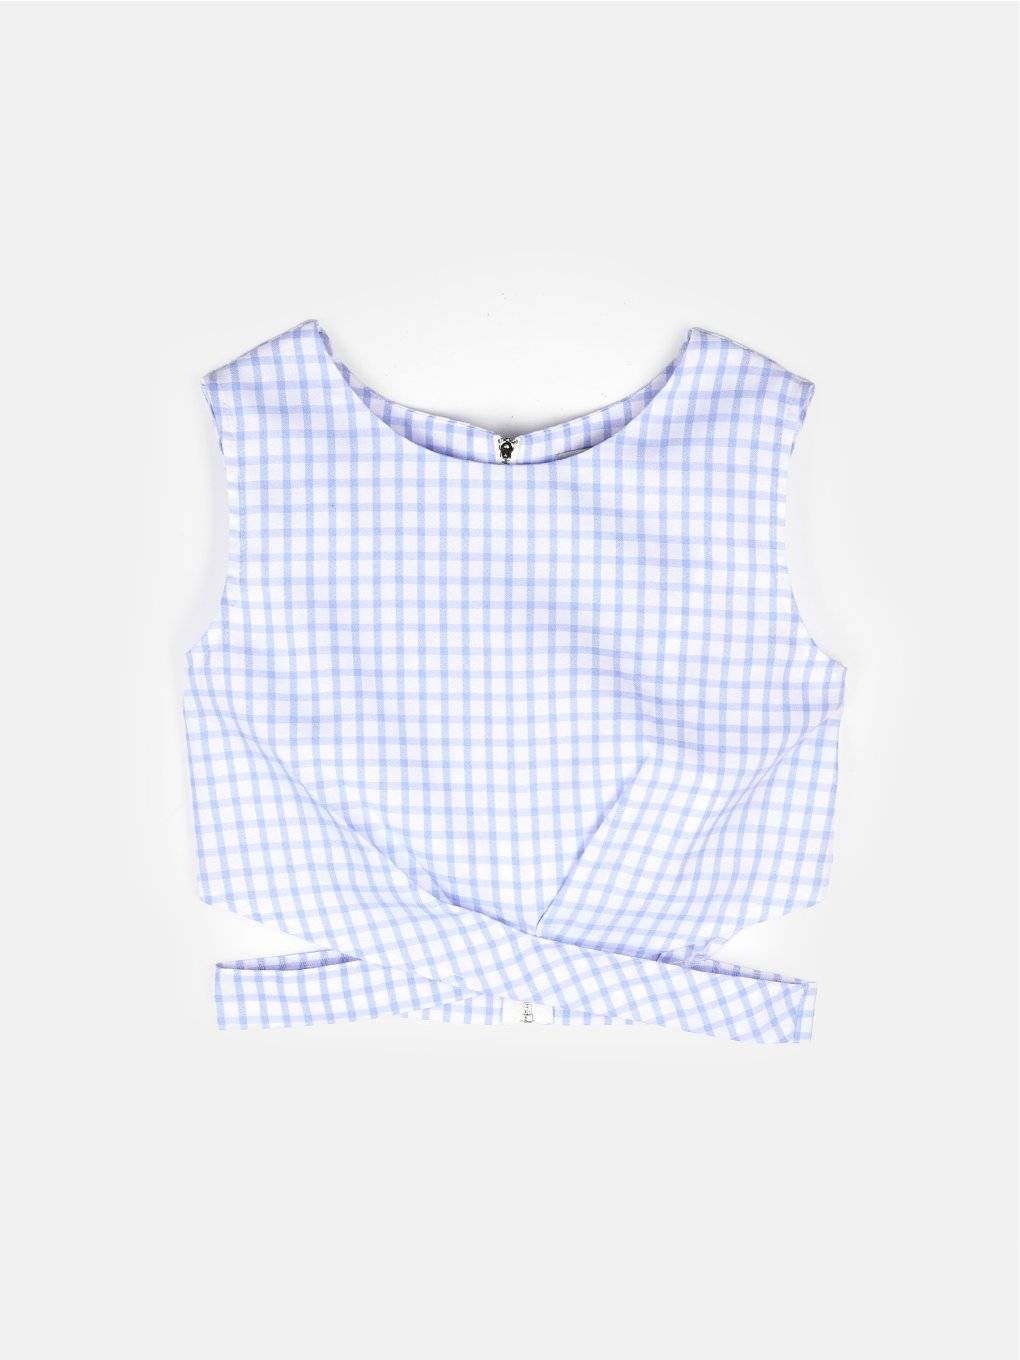 Ladies plaid blouse without sleeves